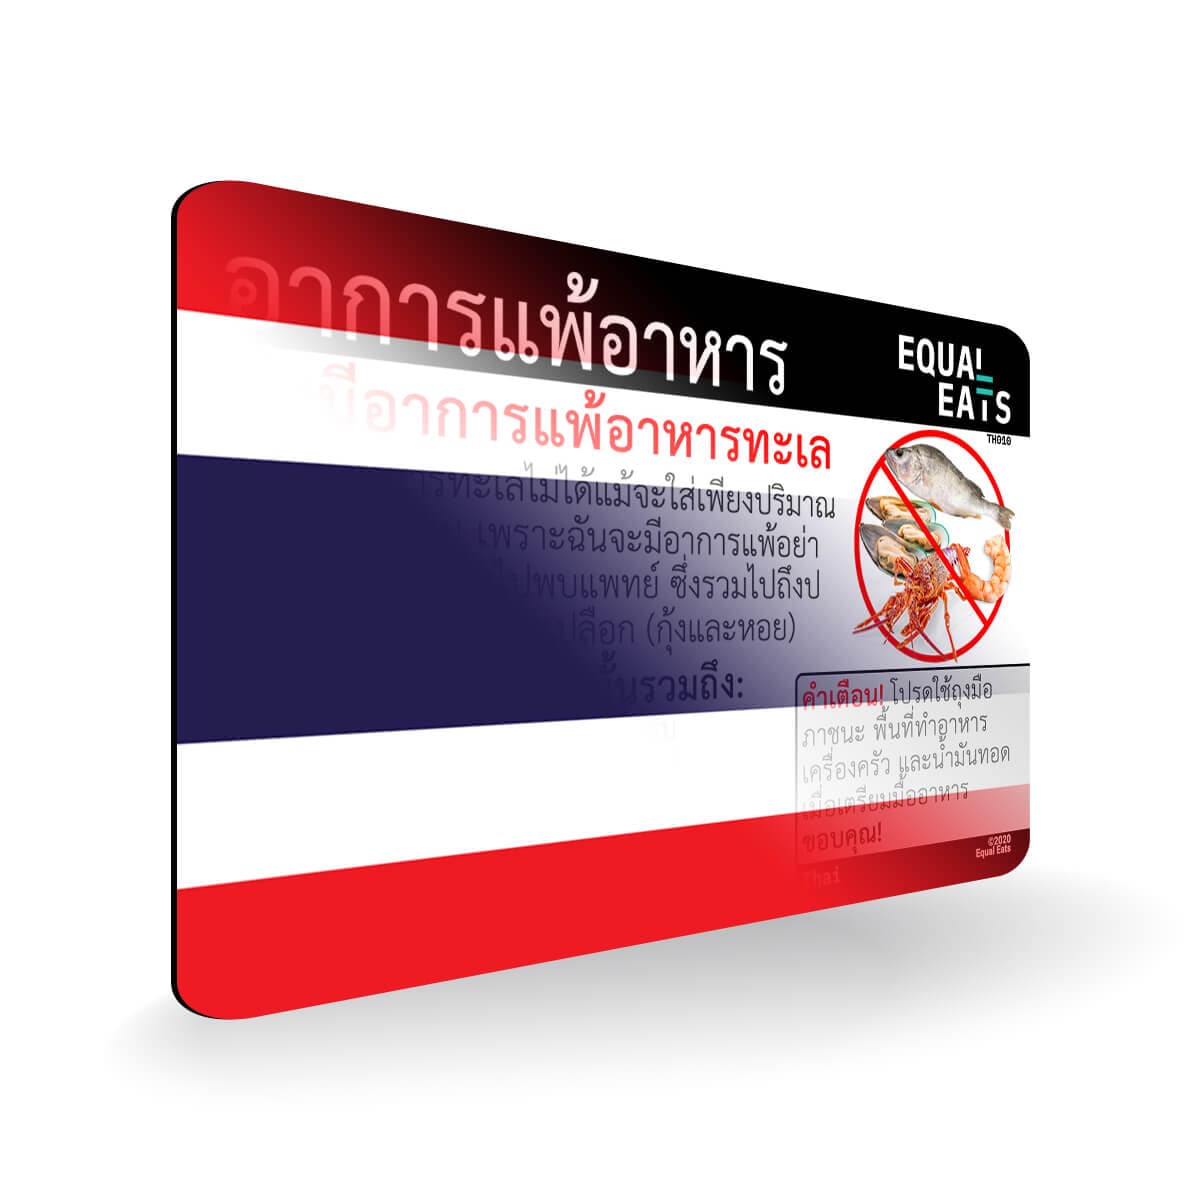 Seafood Allergy in Thai. Seafood Allergy Card for Thailand